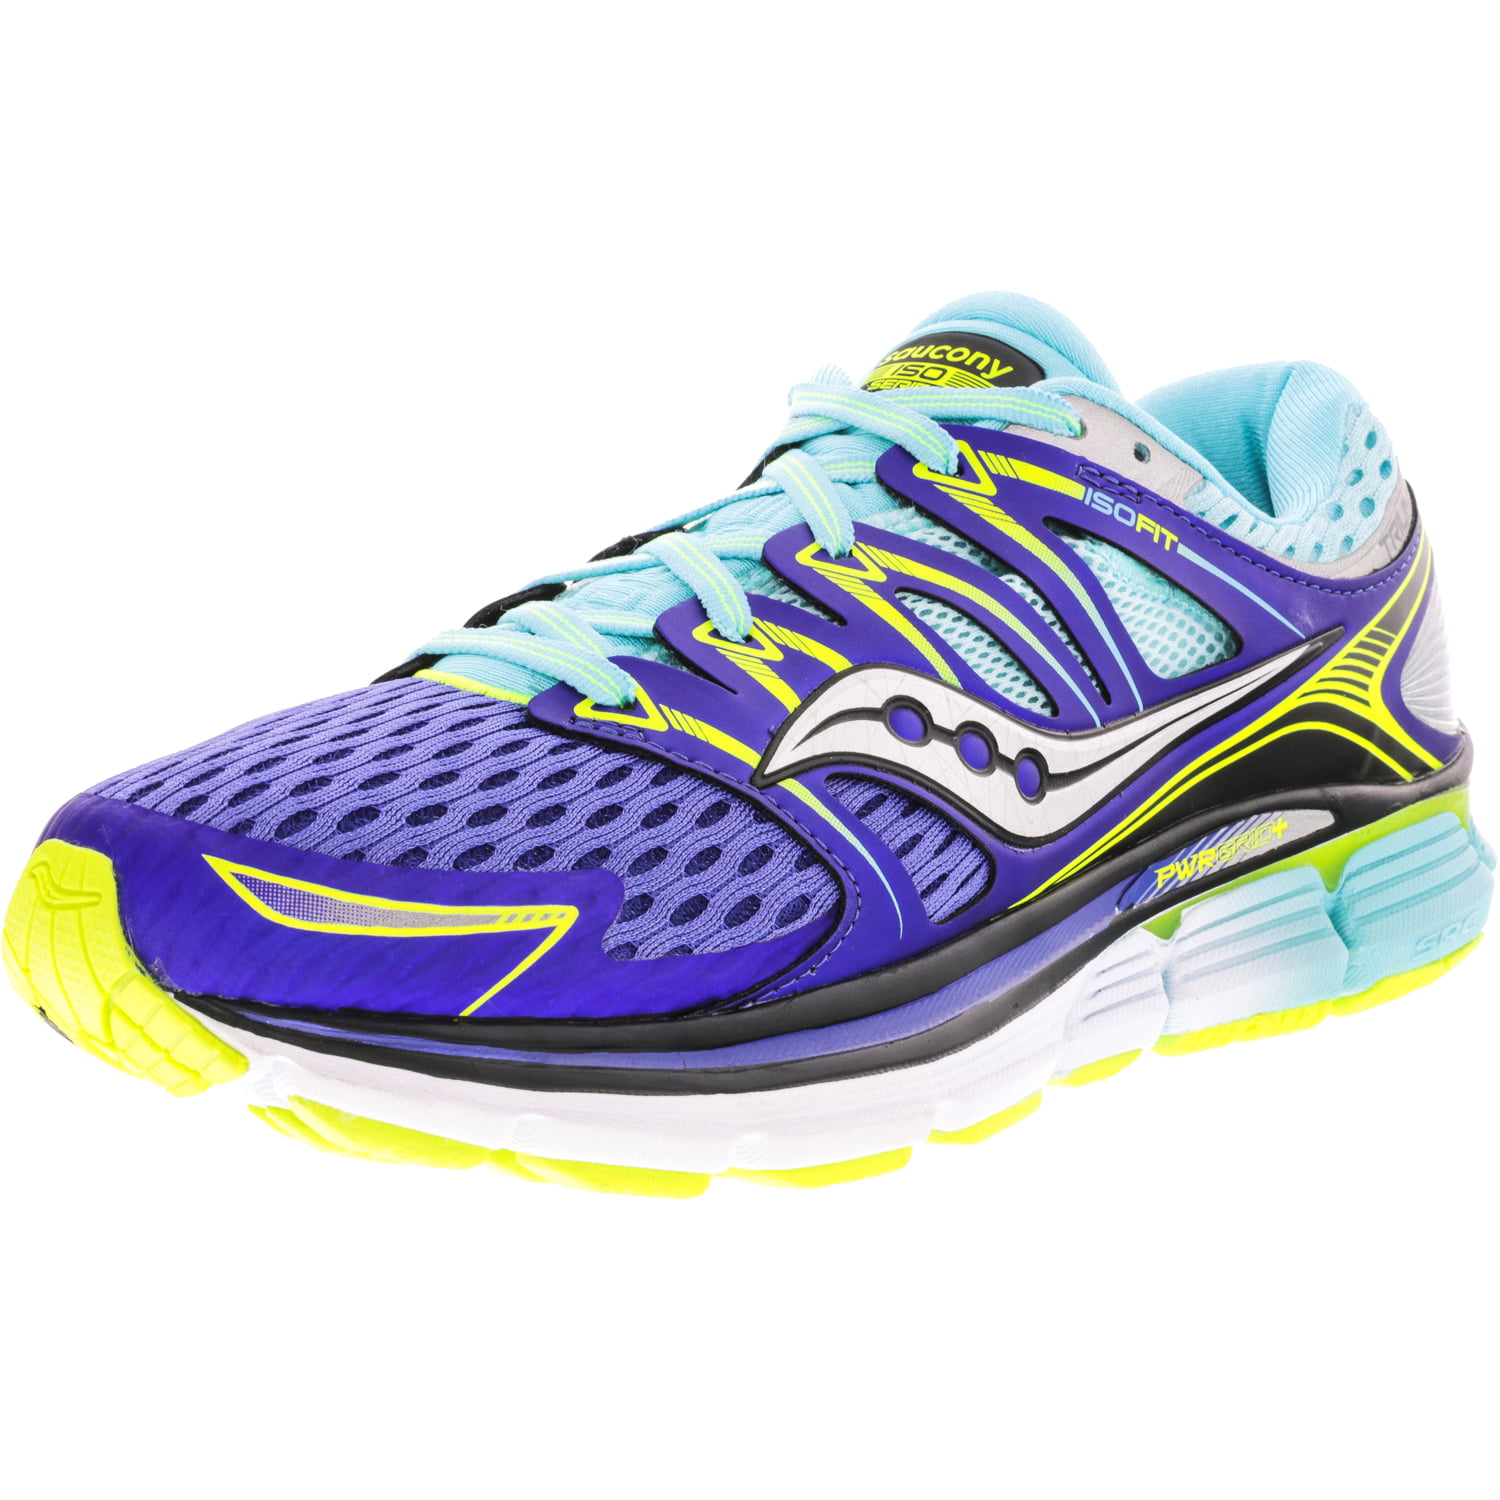 Oxygen Citron Ankle-High Running Shoe 